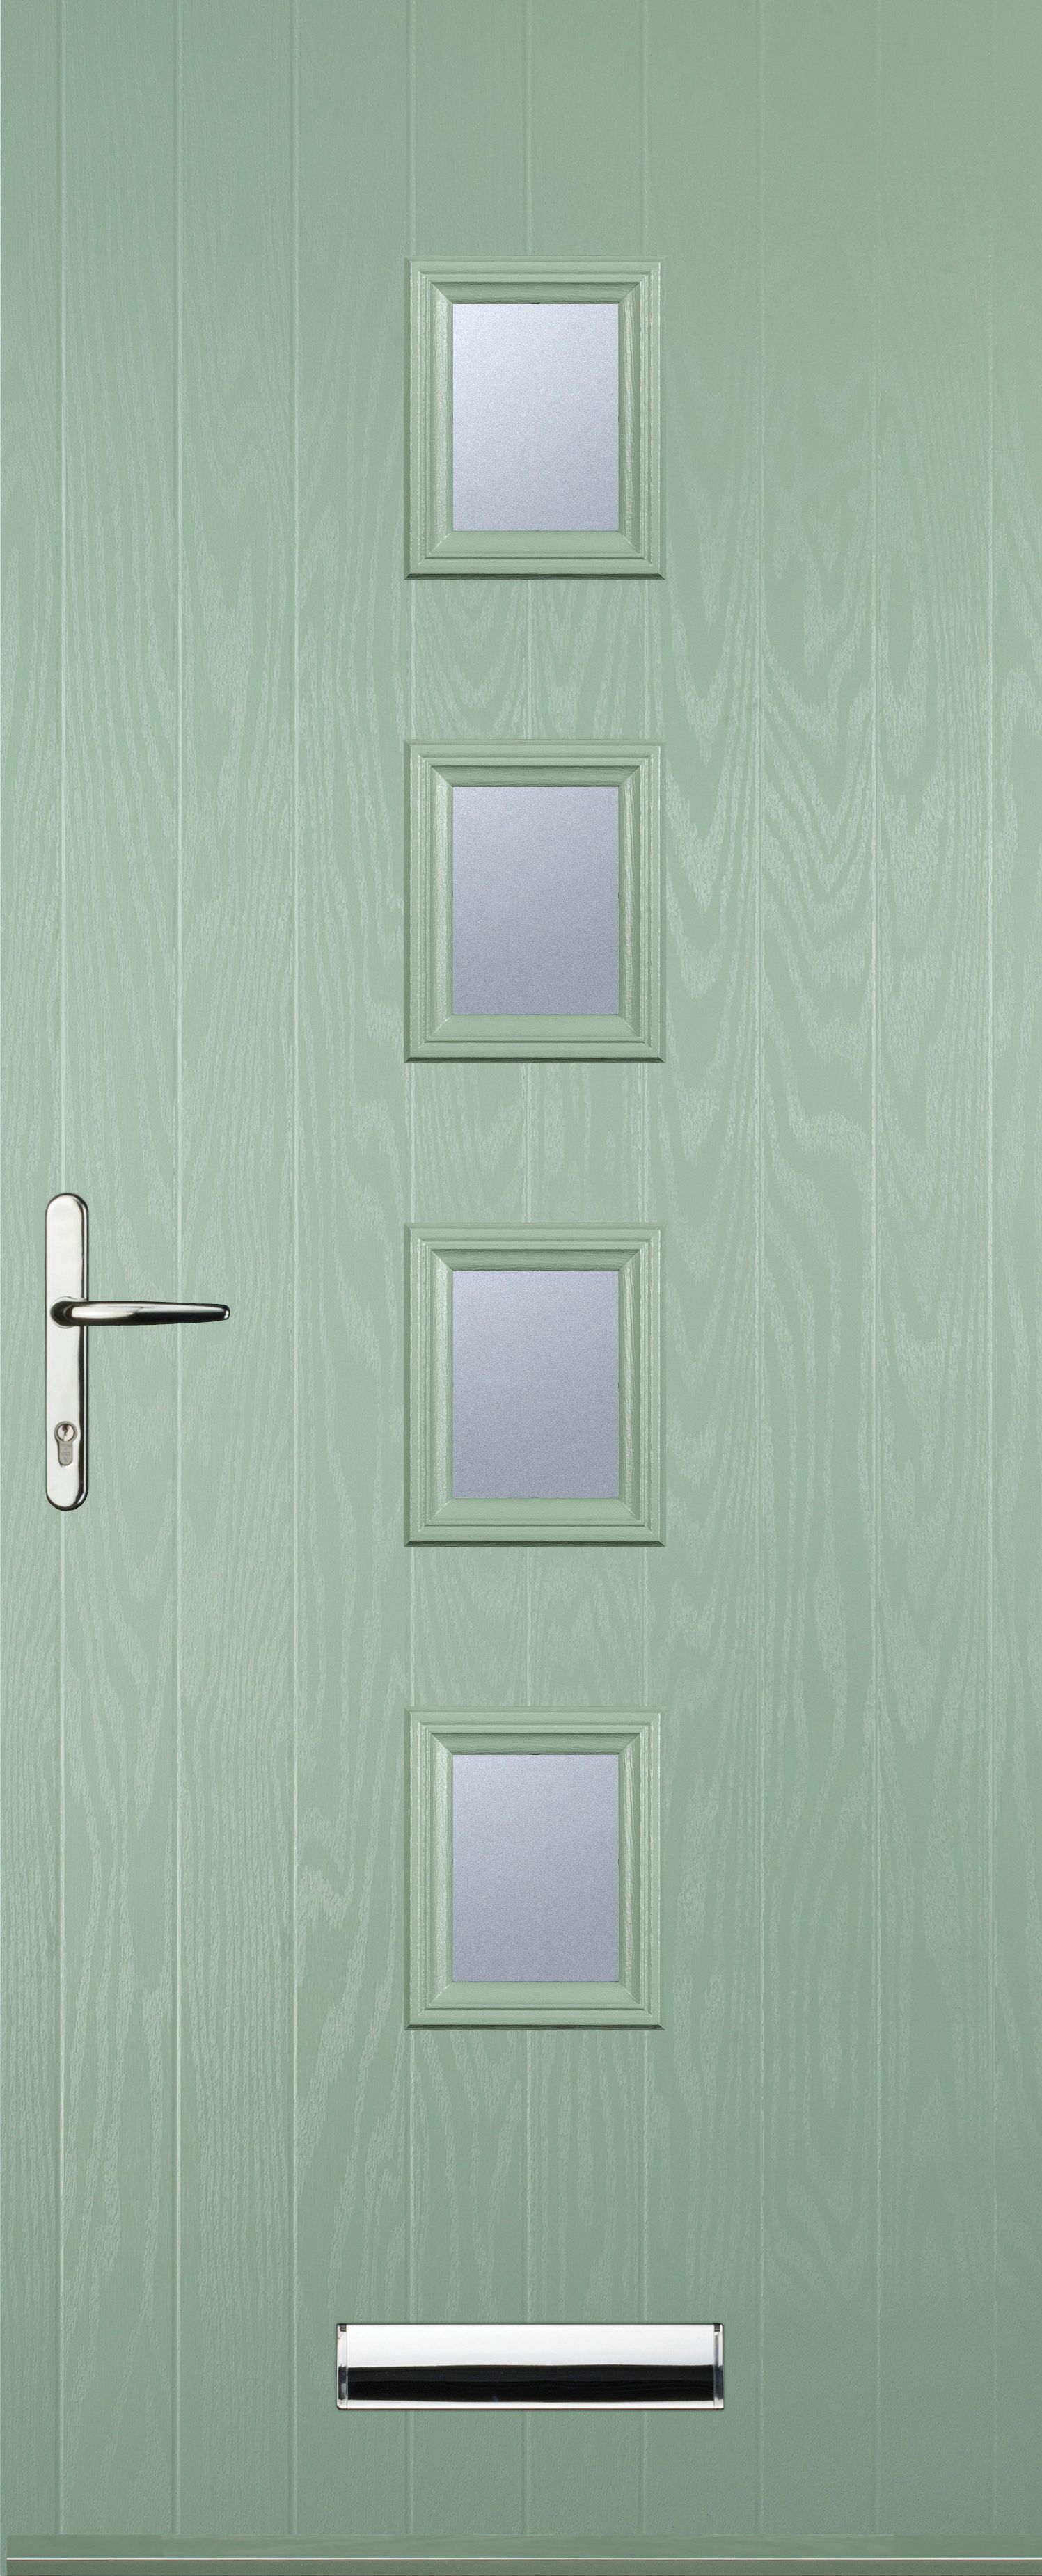 Image of Euramax 4 Square Right Hand Chartwell Green Composite Door - 920 x 2100mm